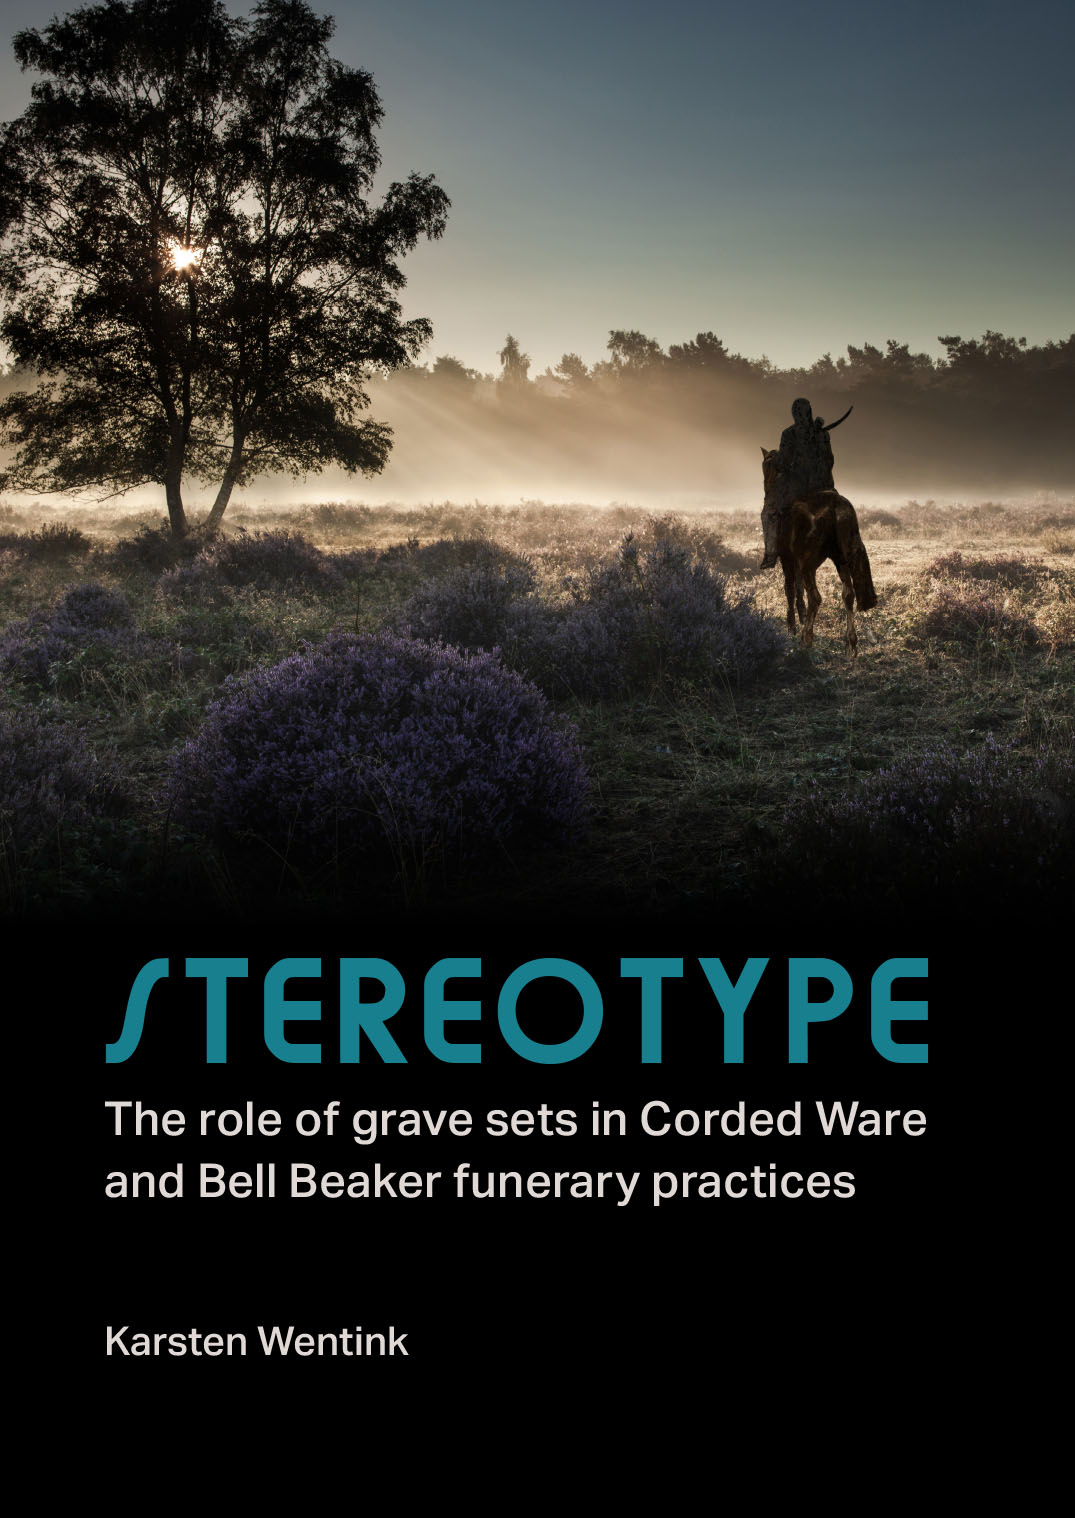 Stereotype. The role of grave sets in Corded Ware and Bell Beaker funerary practices, 2020, 296 p.